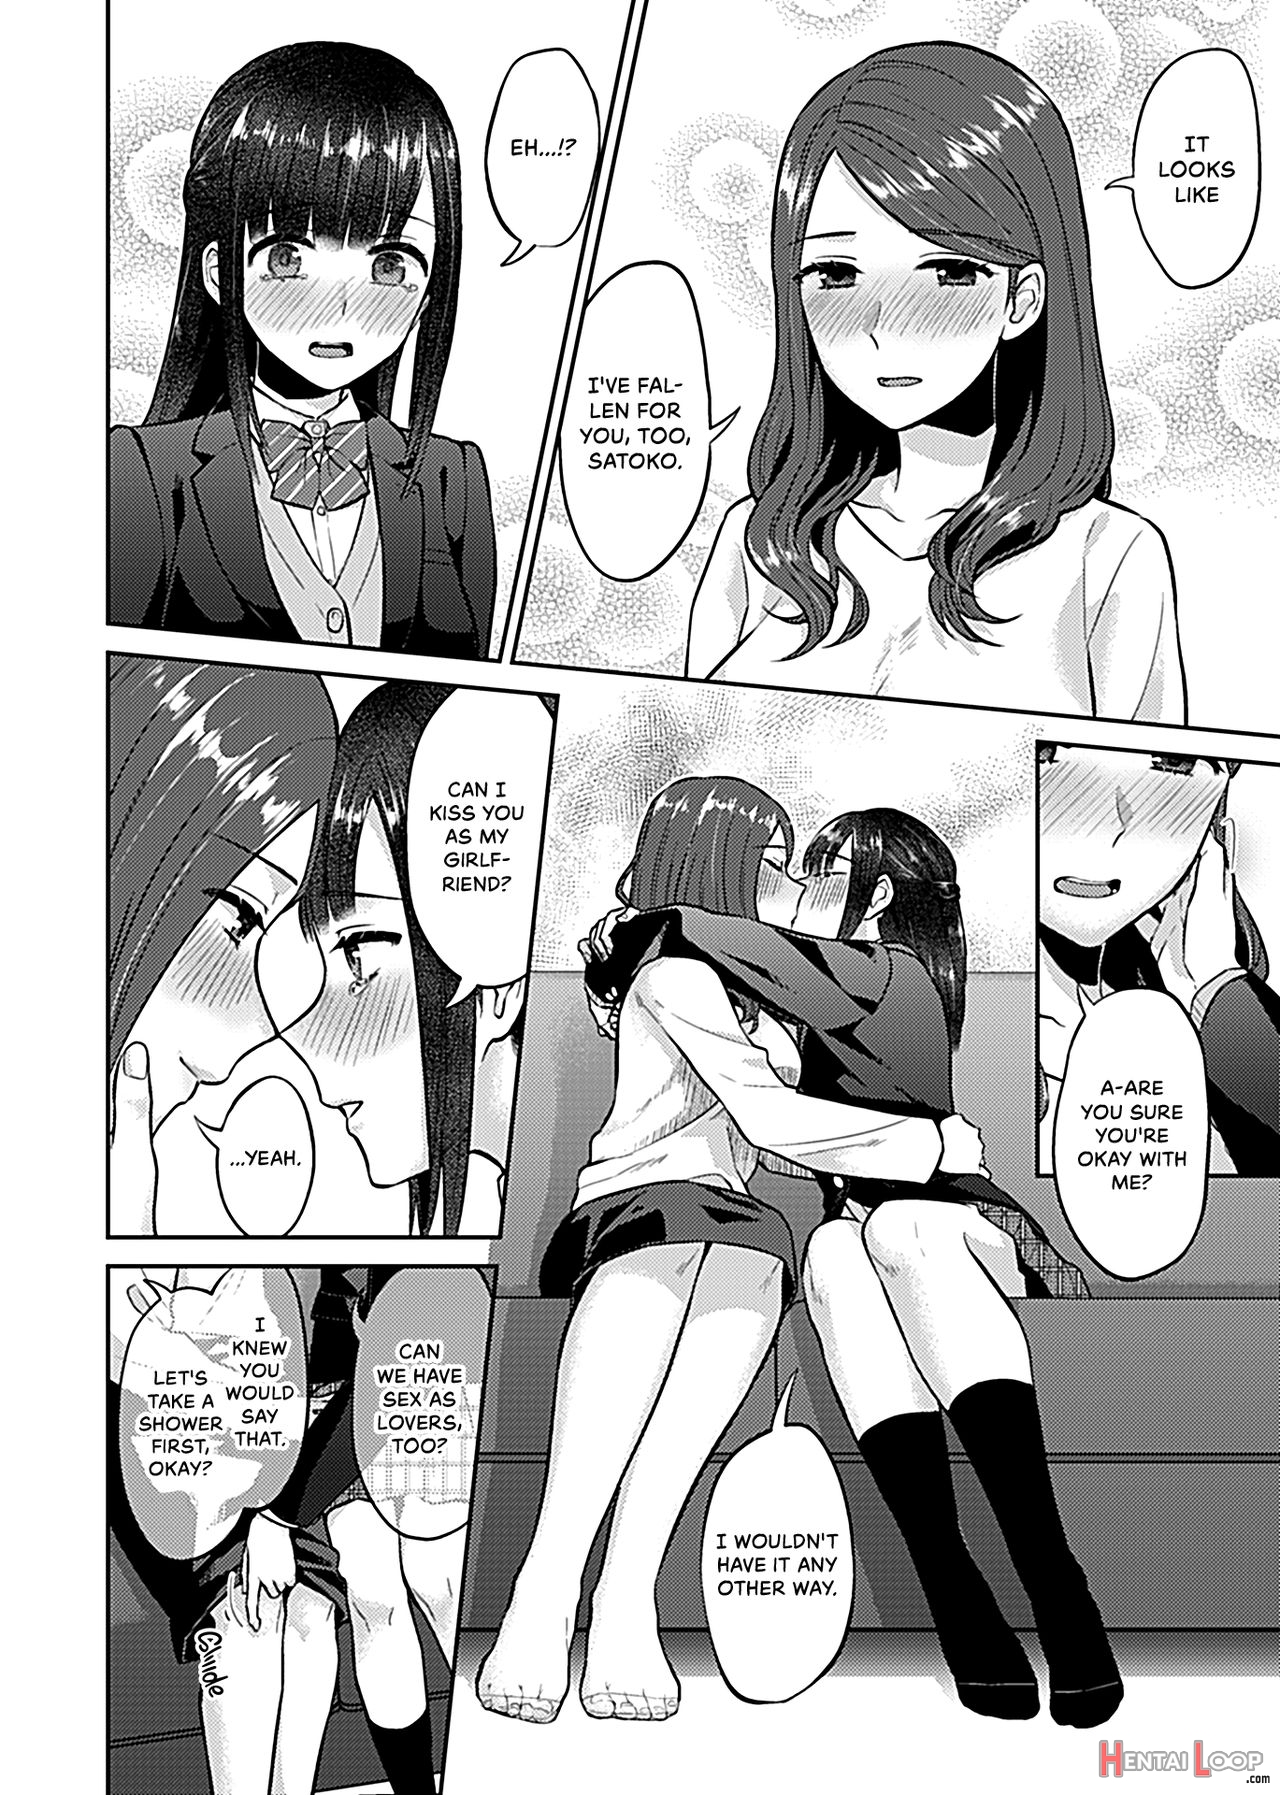 Lilies Are In Full Bloom - Volume 1 page 98